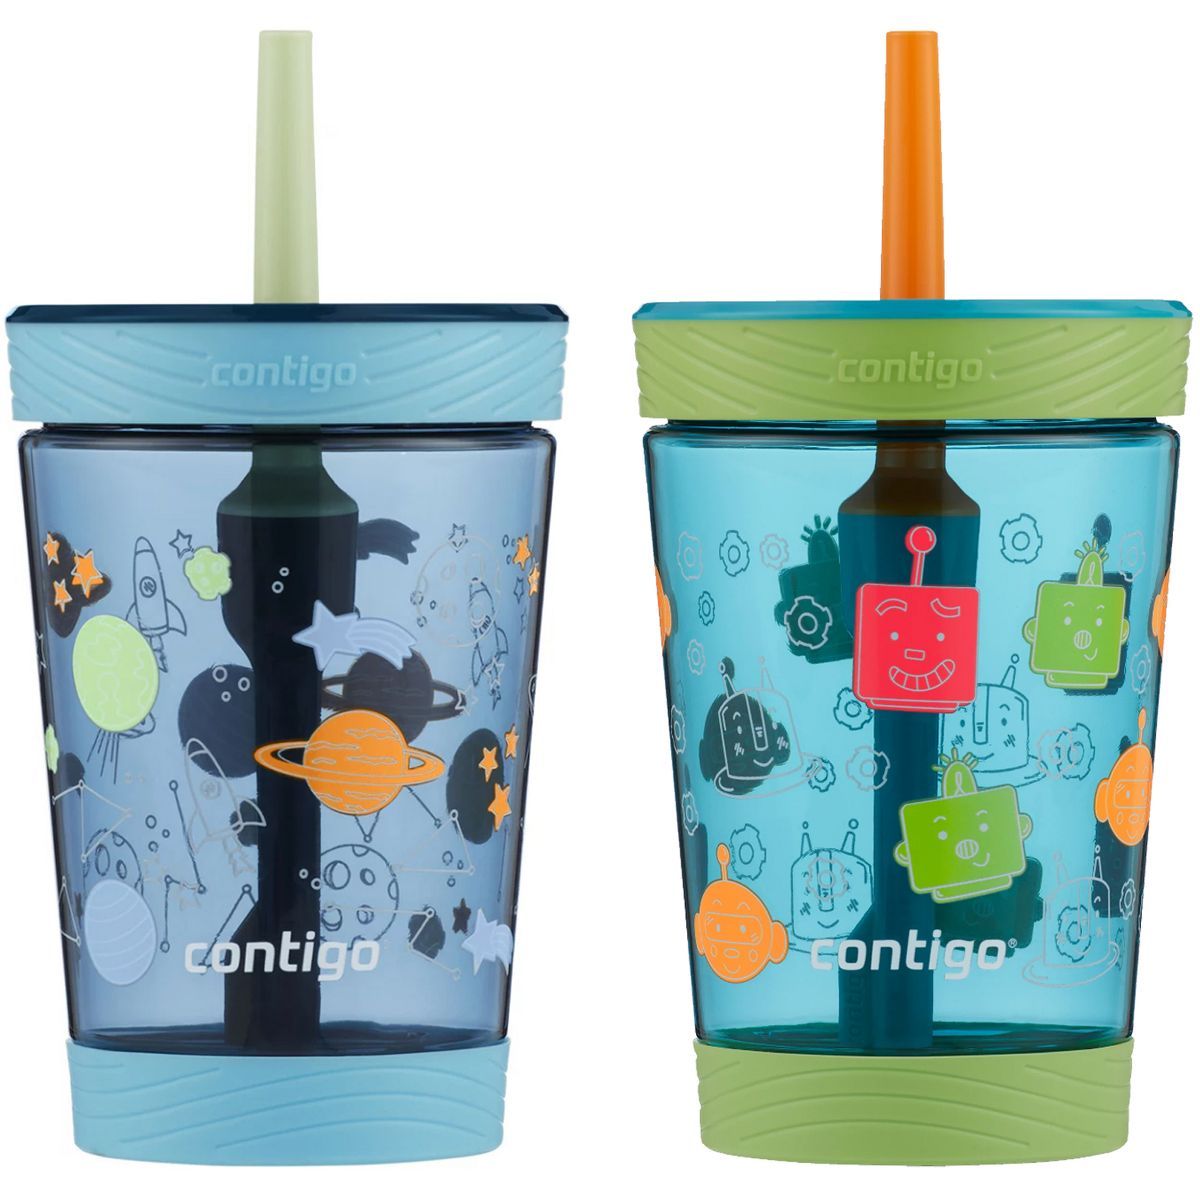 Contigo Kid's 14 oz. Spill-Proof Tumbler with Straw 2-Pack- Cosmos/Friendly Bots | Target